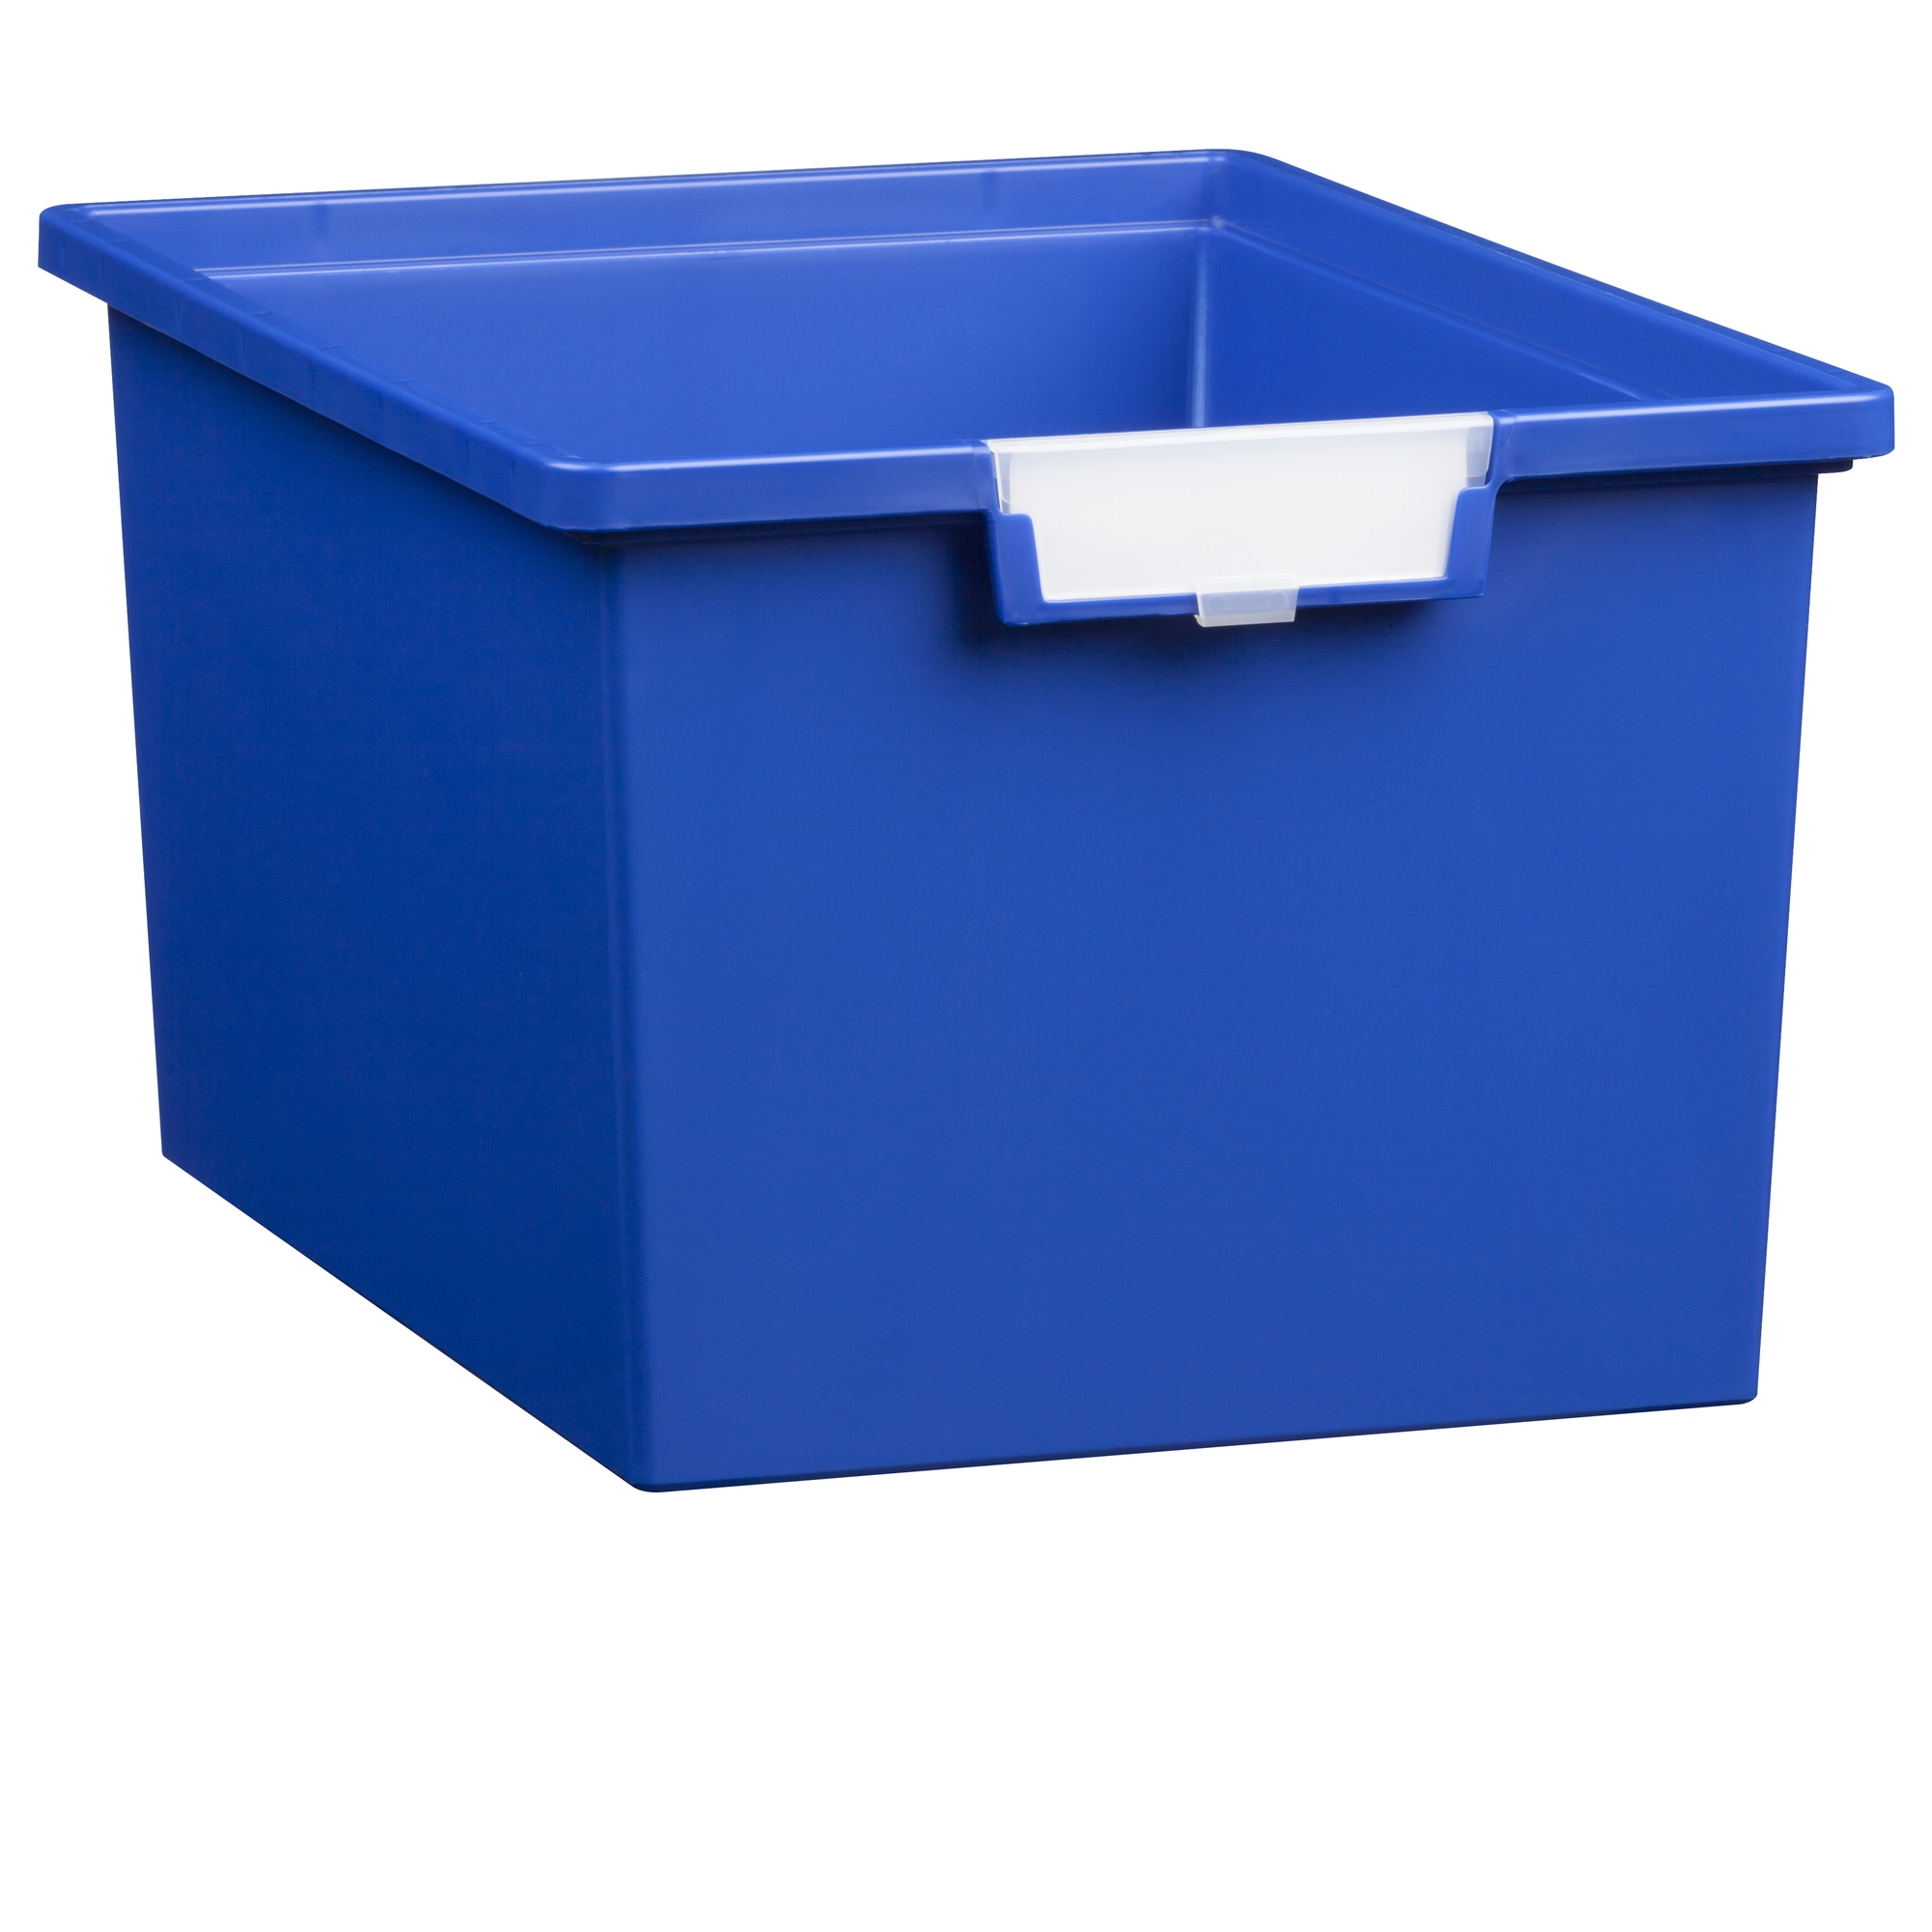 Certwood StorWerks, Slim Line 9Inch Tray in Primary Blue-3PK, Included (qty.) 3 Height 9 in, Model CE1953PB3